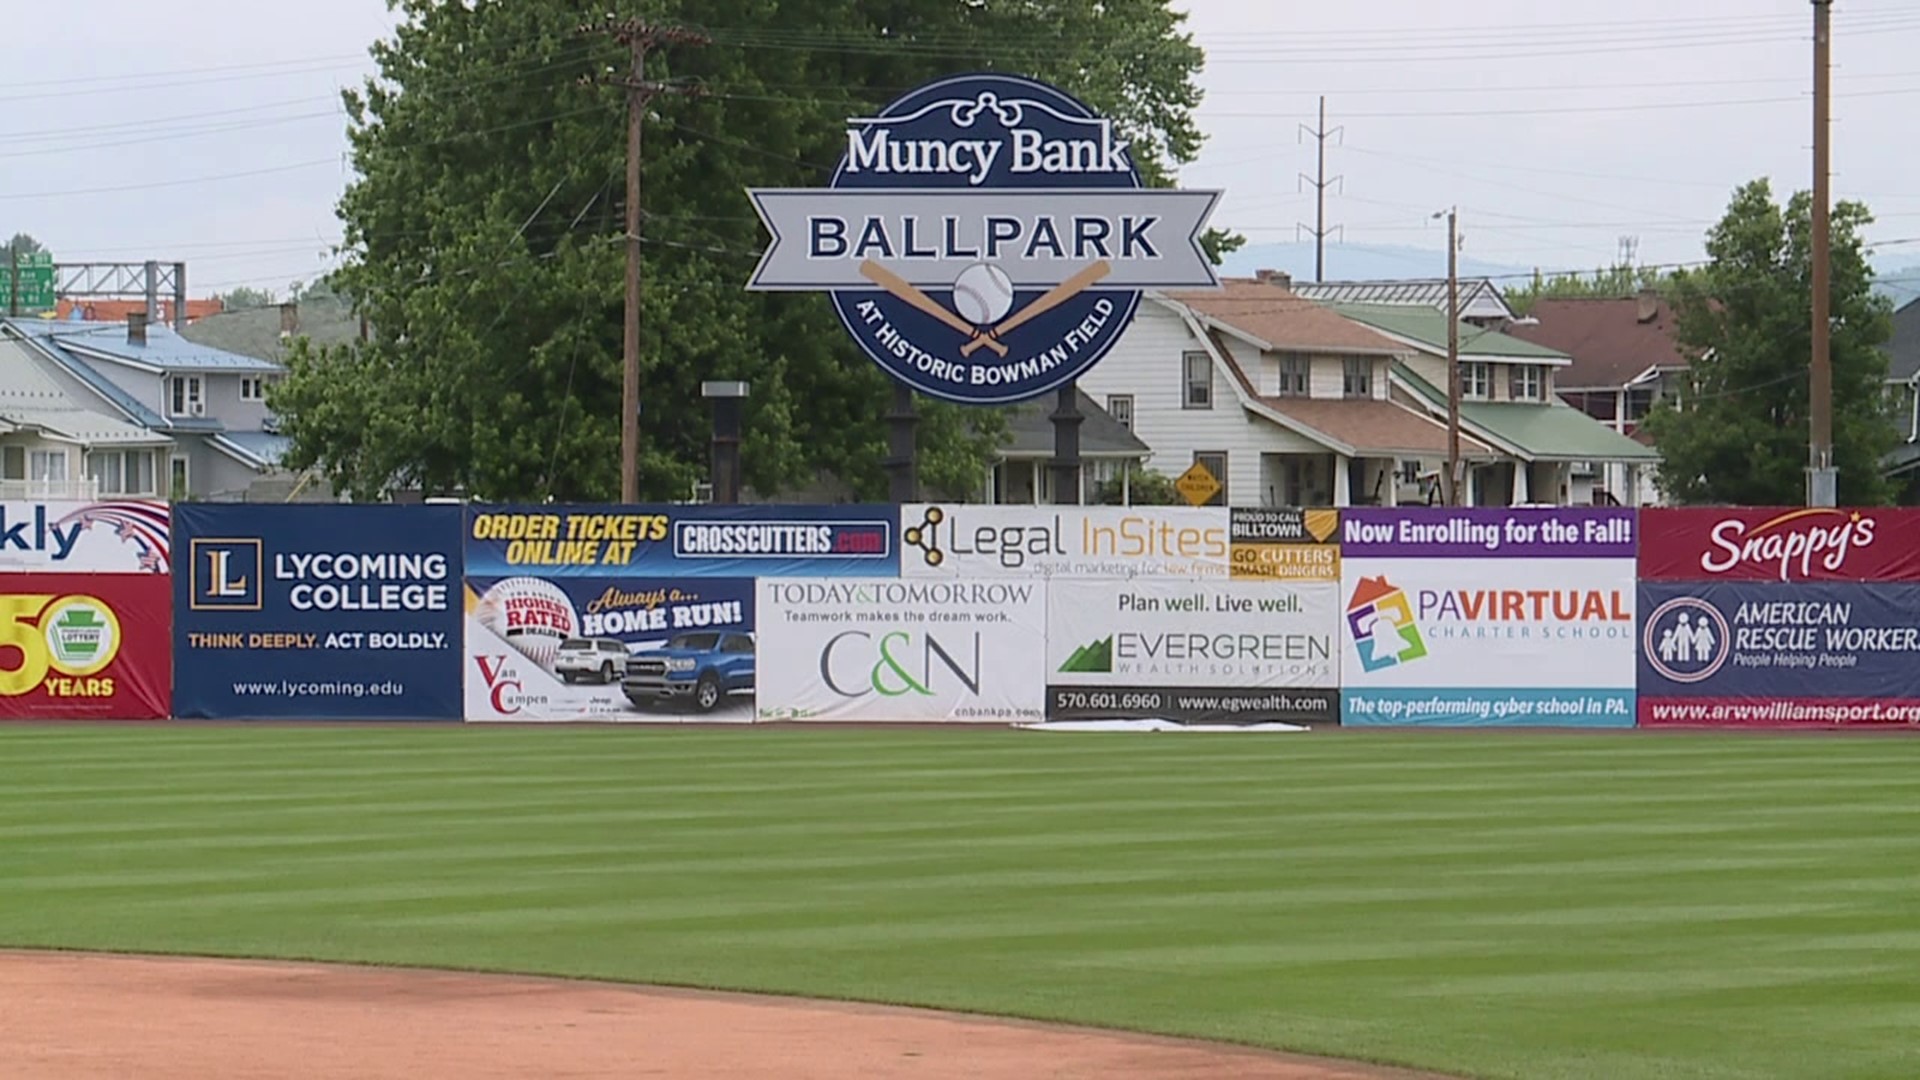 The Williamsport Crosscutters open up their season against the State College Spikes Thursday night.